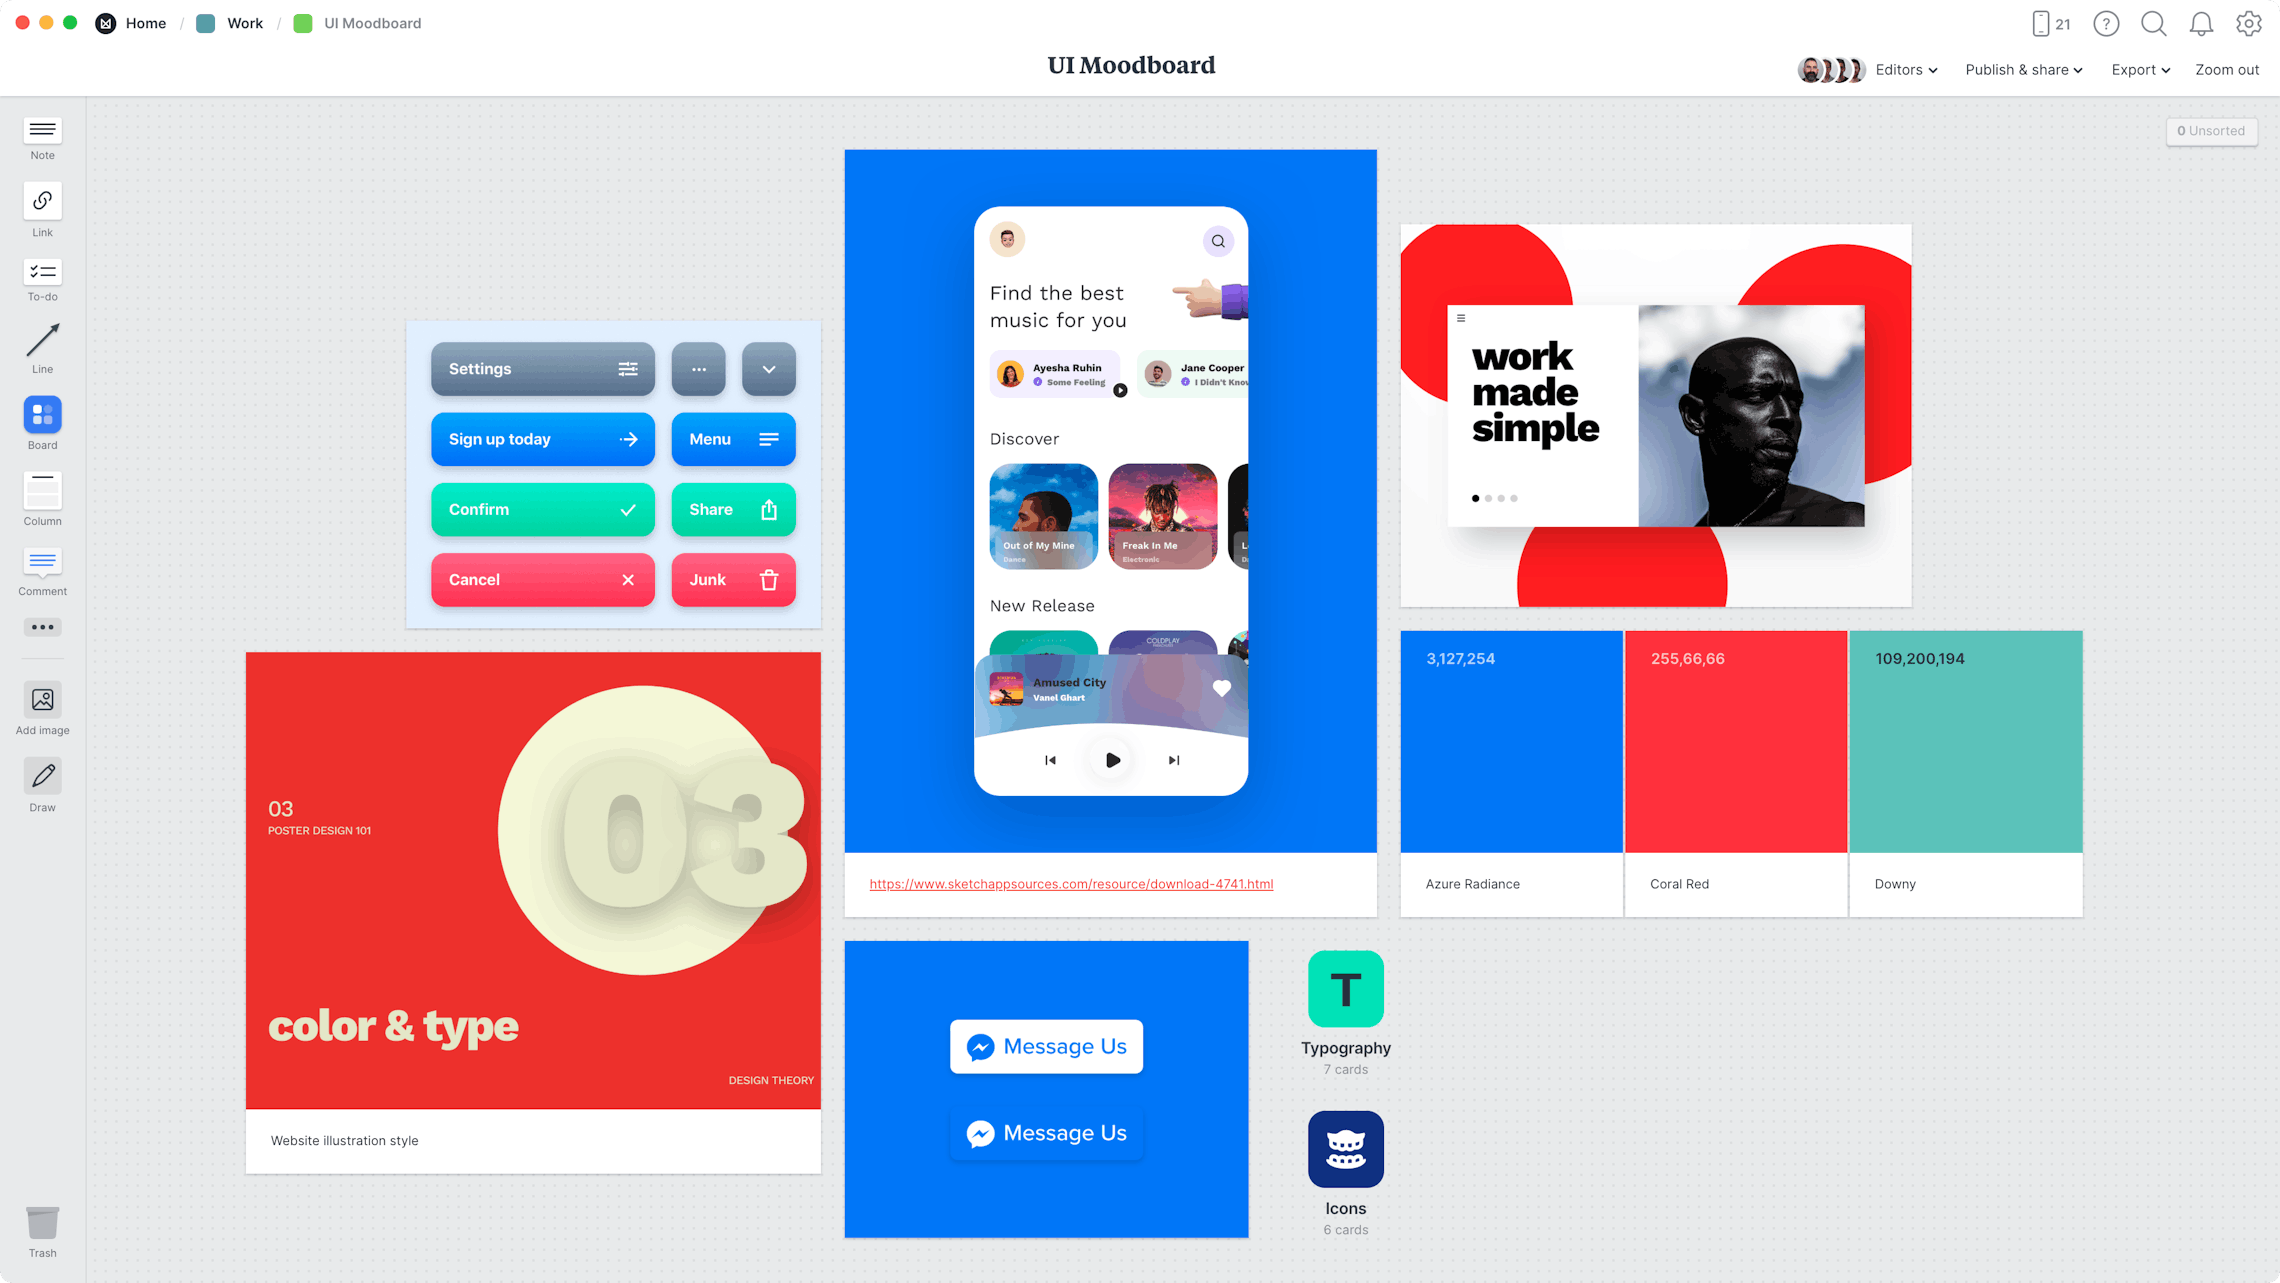 UI Moodboard Template, within the Milanote app